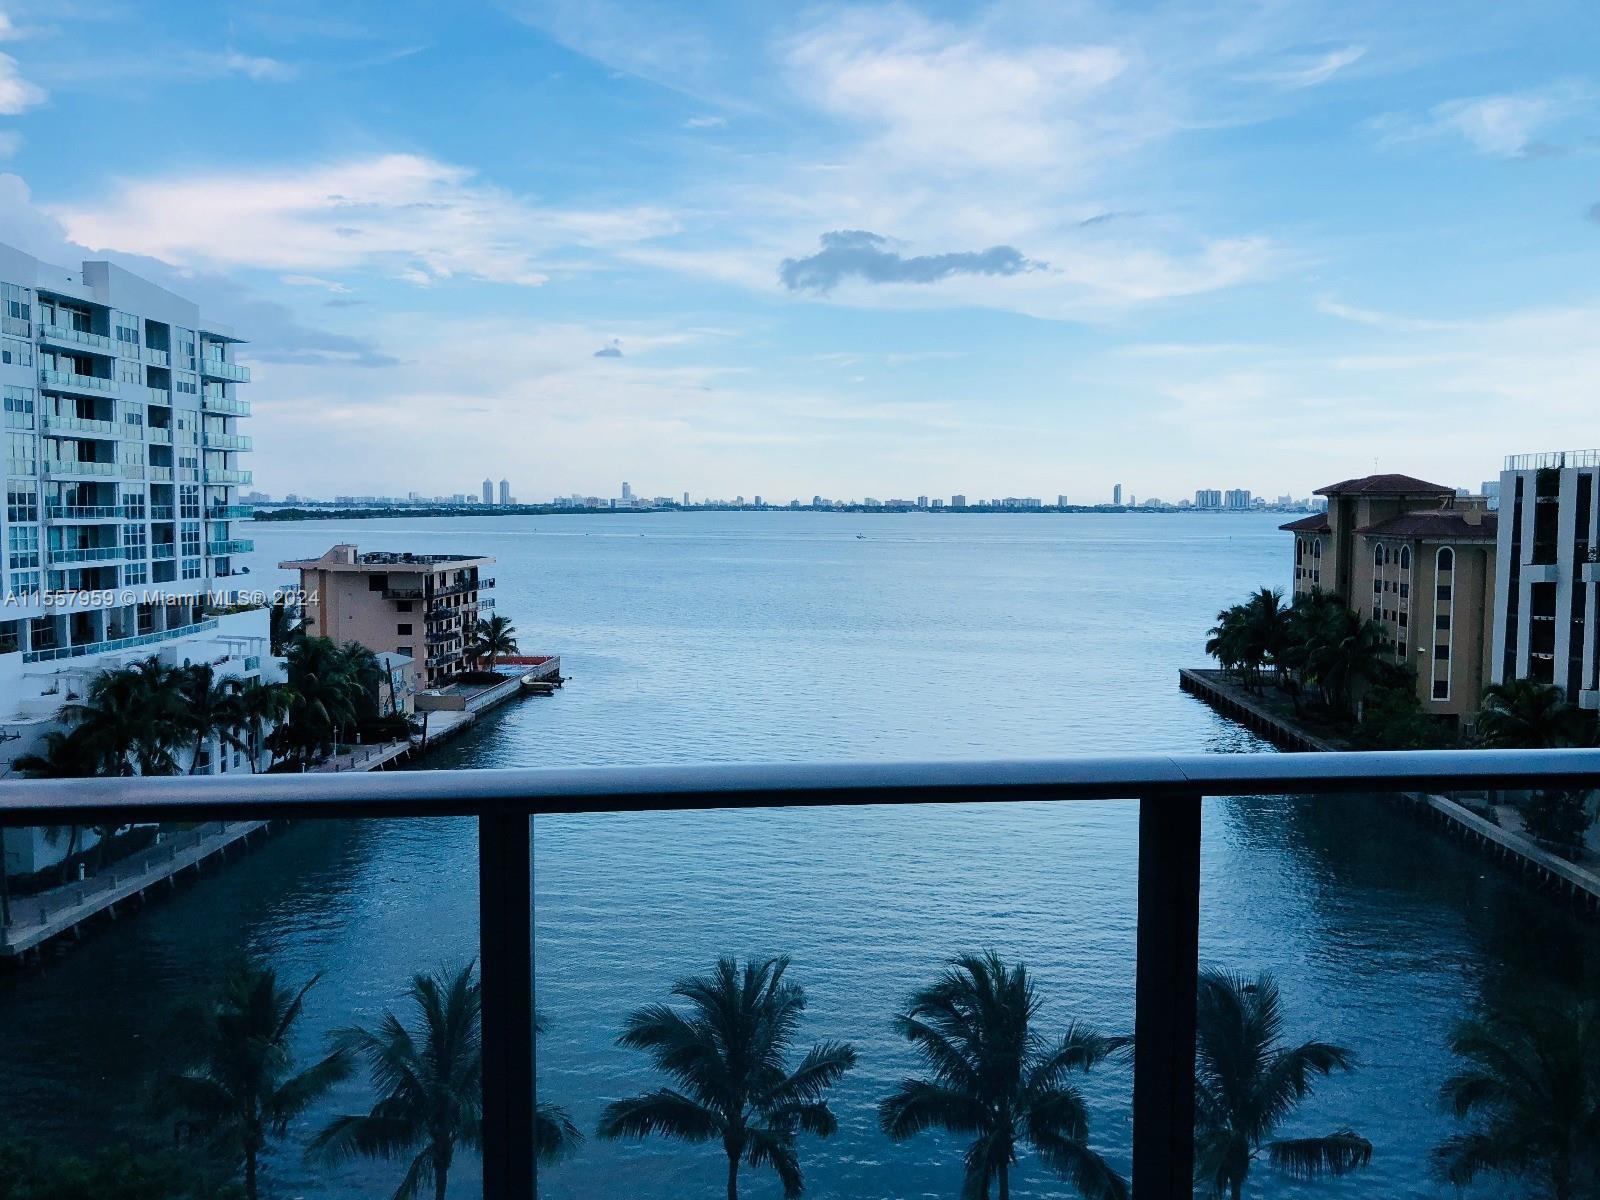 This stunning 2-bedroom, 2-bathroom waterfront condo in Icon Bay offers breathtaking views of Biscay